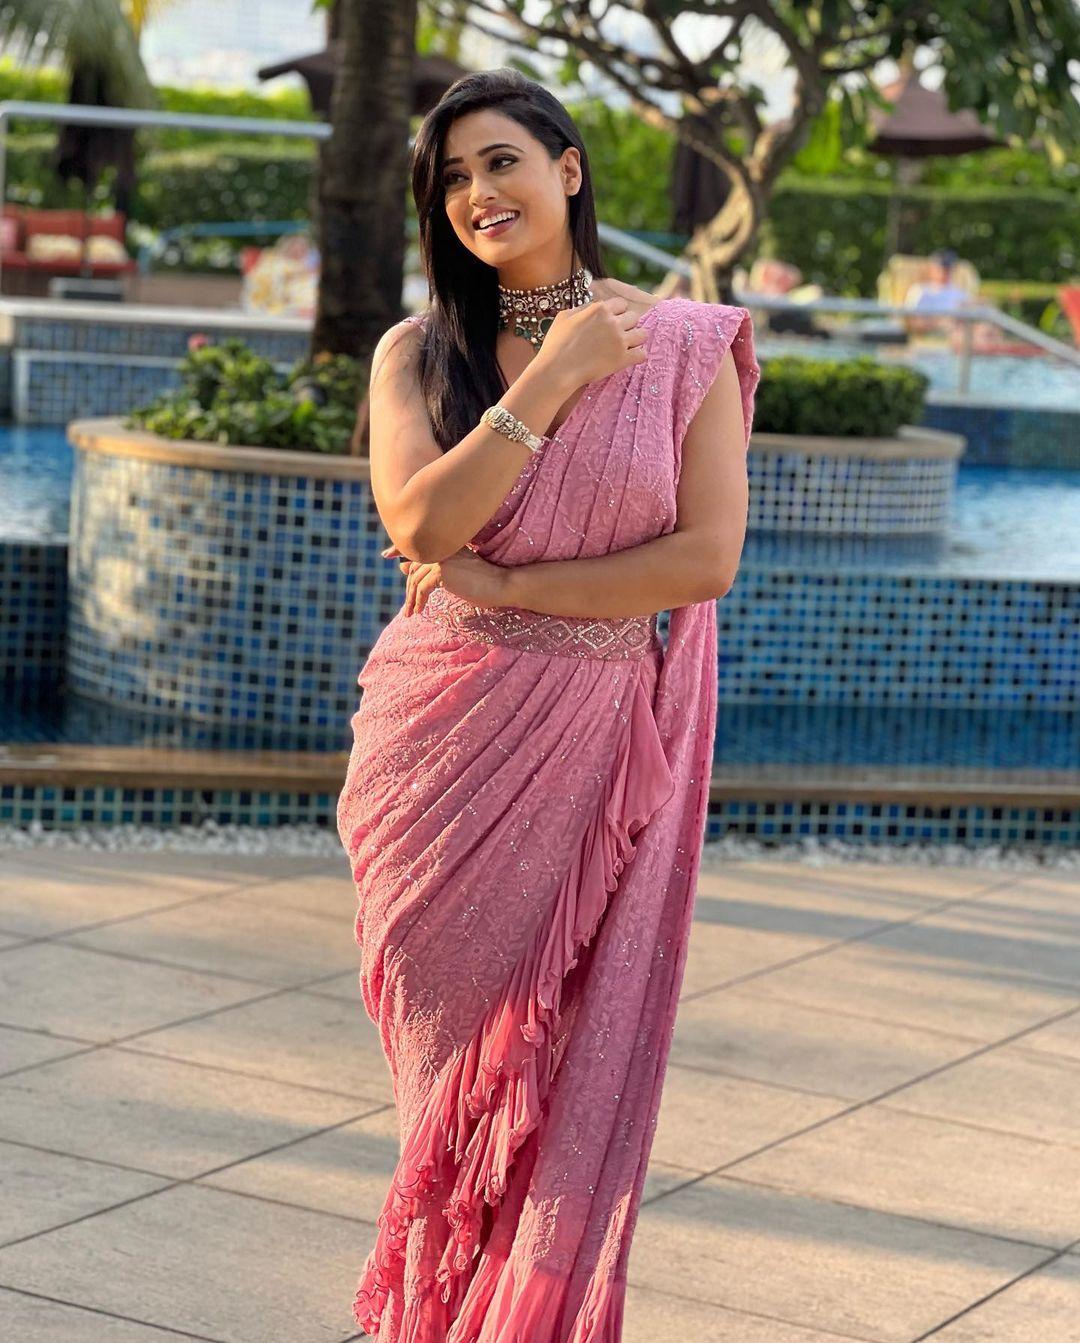 Shweta Tiwari dazzled the world as she opted for a pink embroidered saree